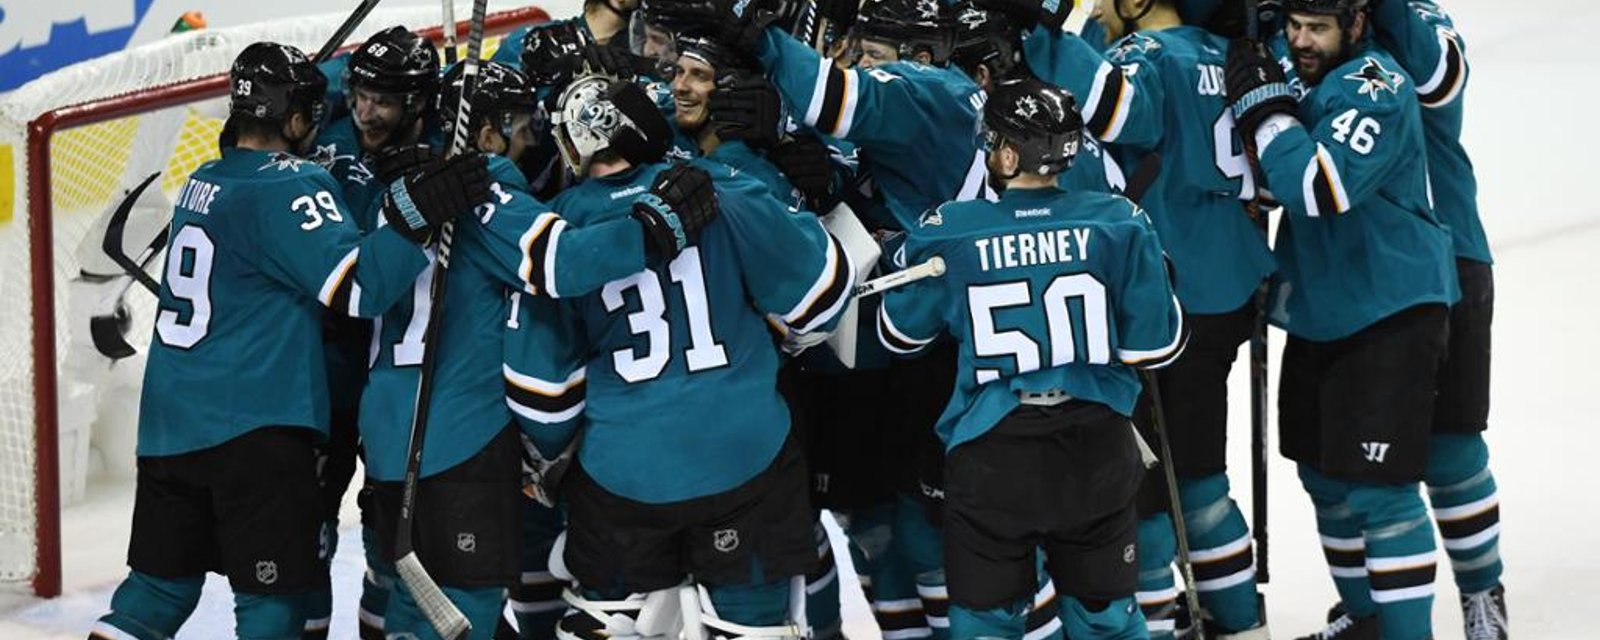 Sharks first round matchup preview! 